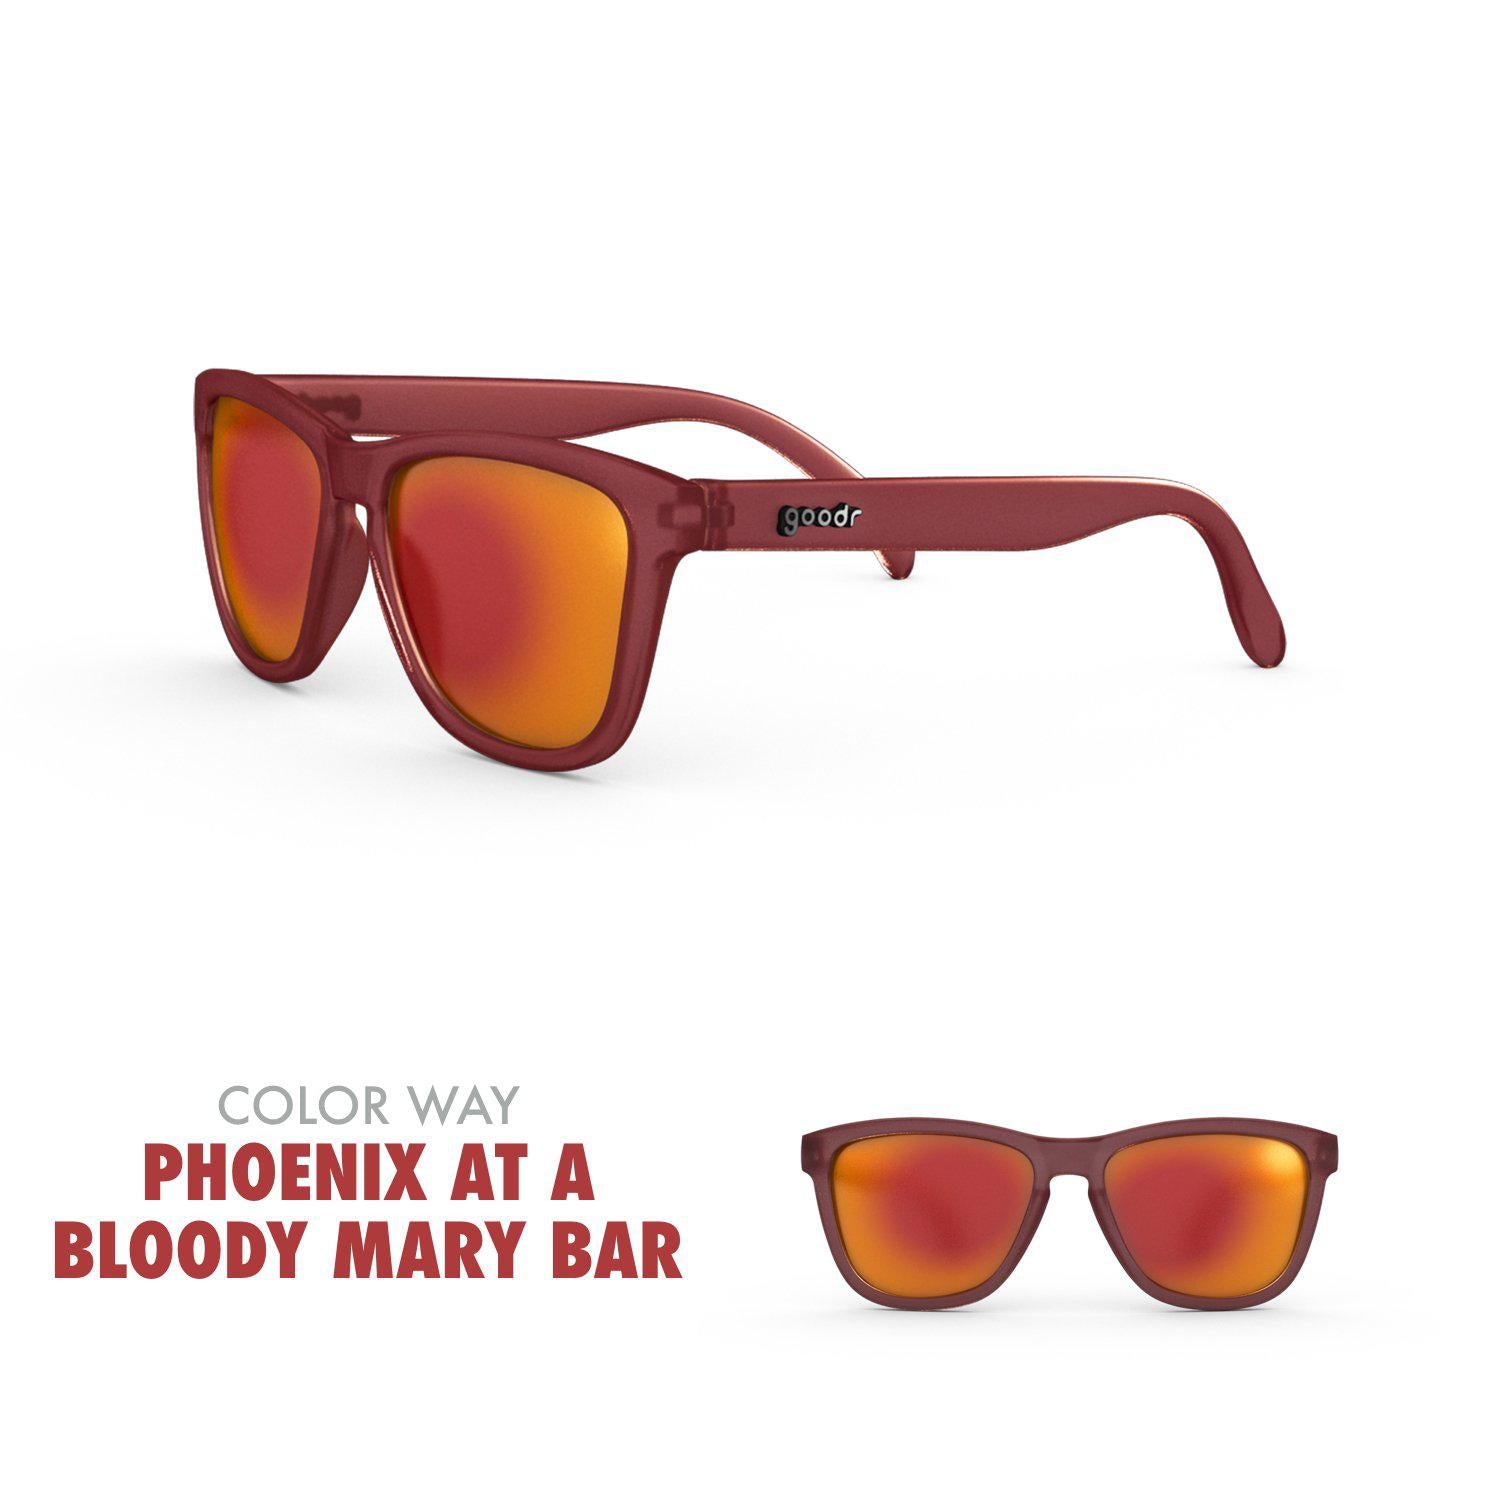 Goodr Running Sun Glasses-Clothing Accessories-Goodr-Phoenix at a Bloody Mary Bar-2 Foot Adventures